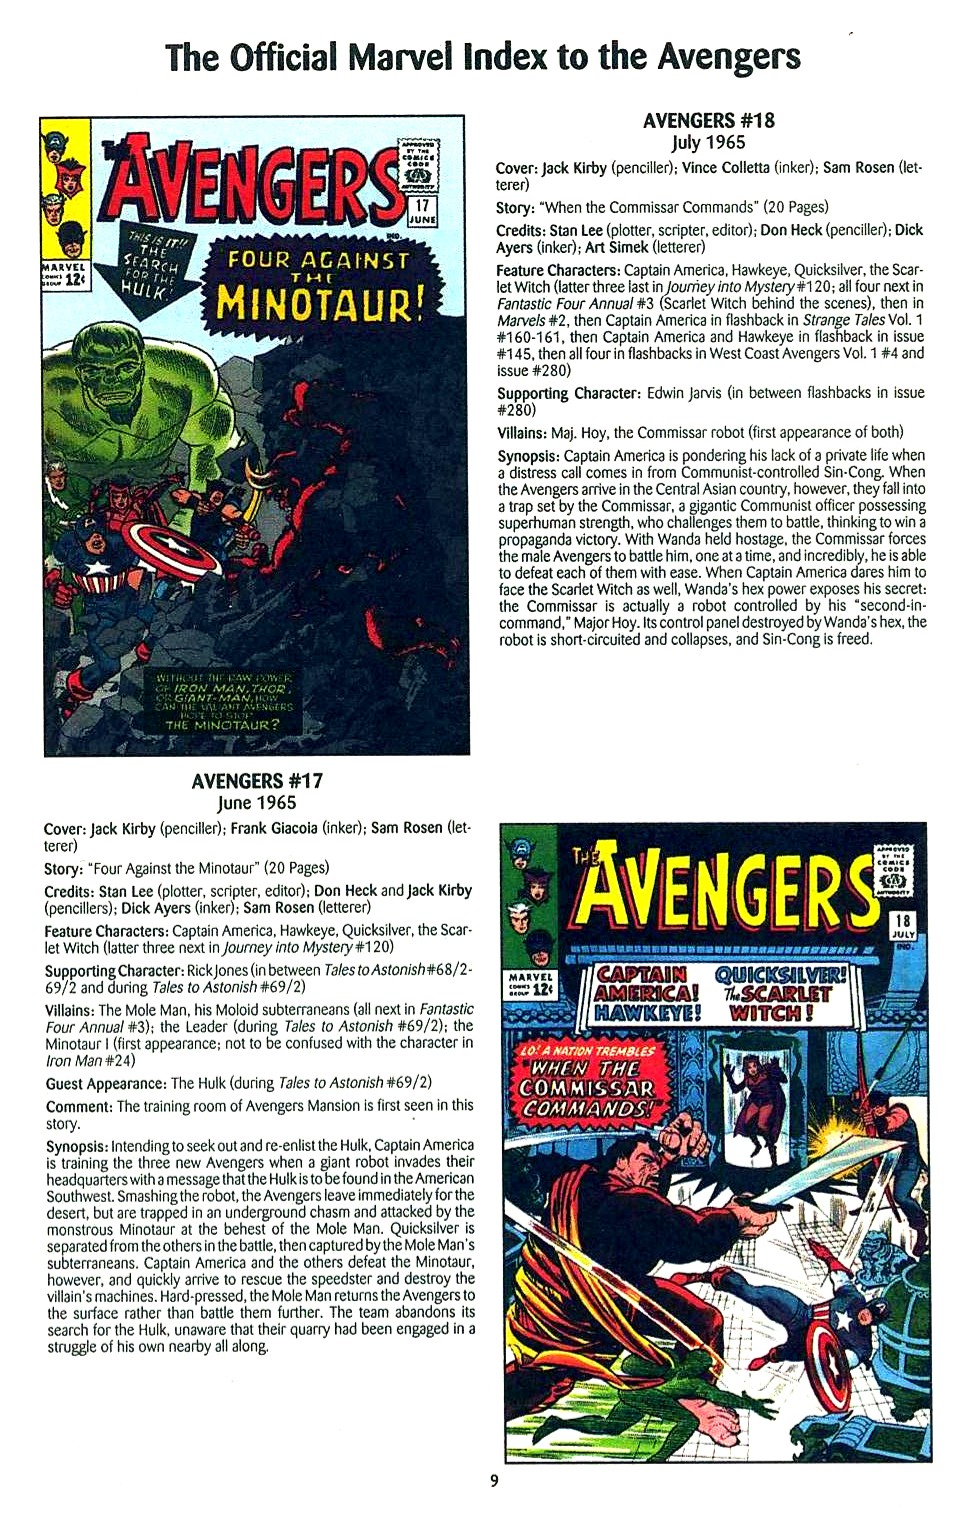 Read online The Official Marvel Index to the Avengers comic -  Issue #1 - 11